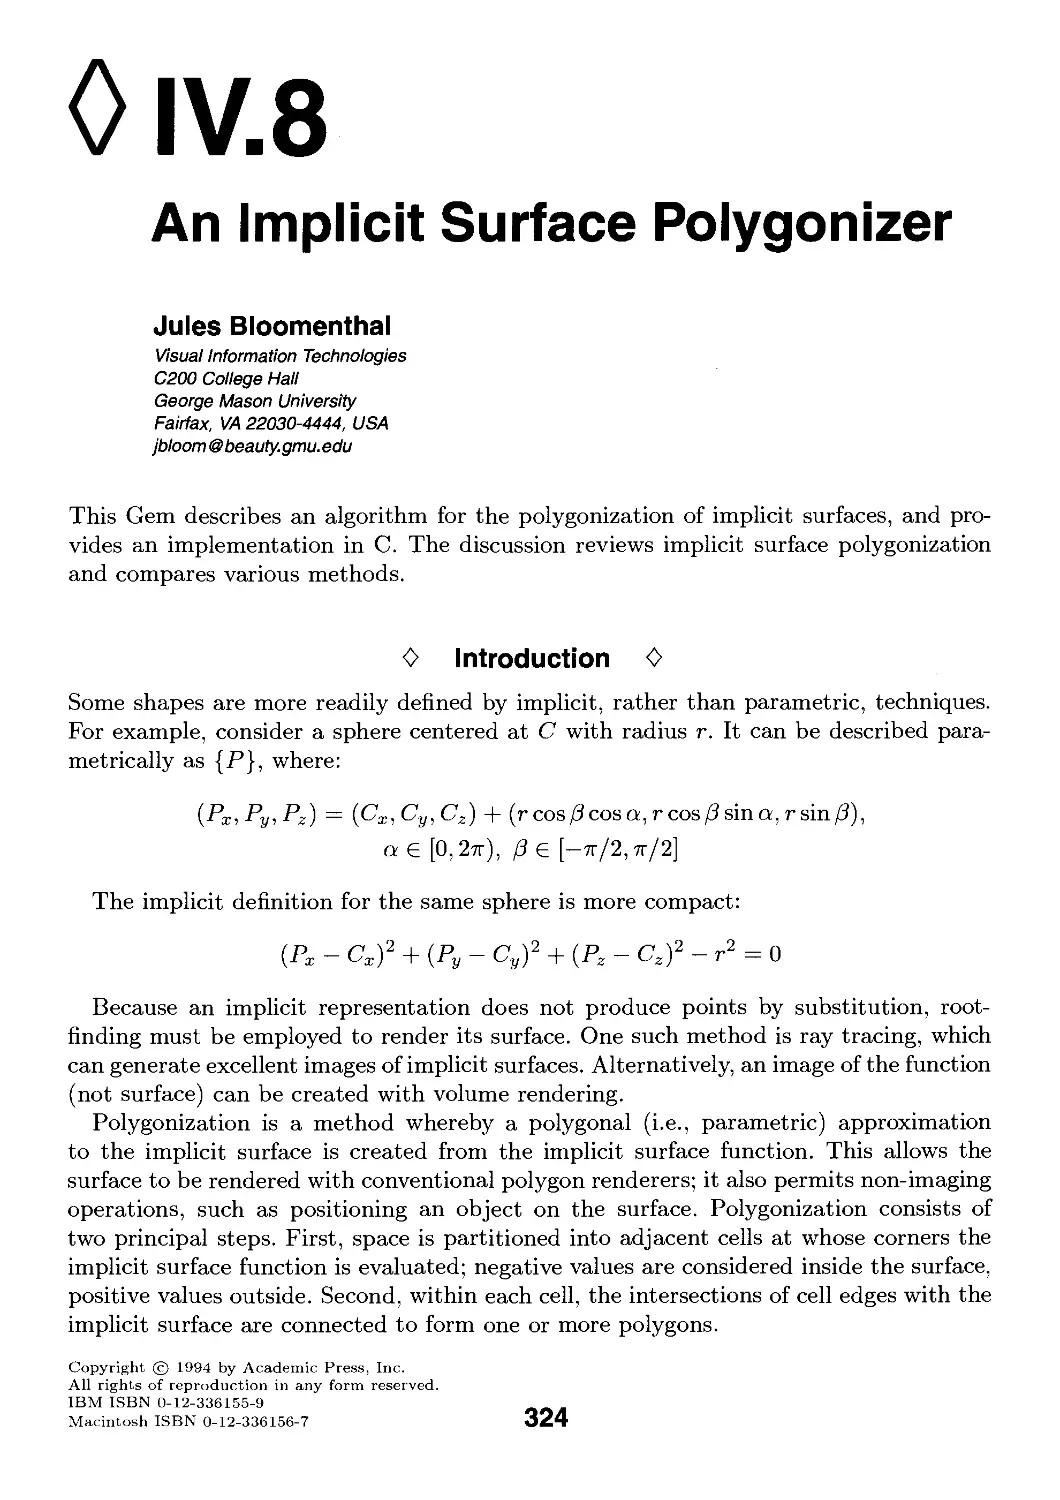 IV.8. An Implicit Surface Polygonizer by Jules Bloomenthal